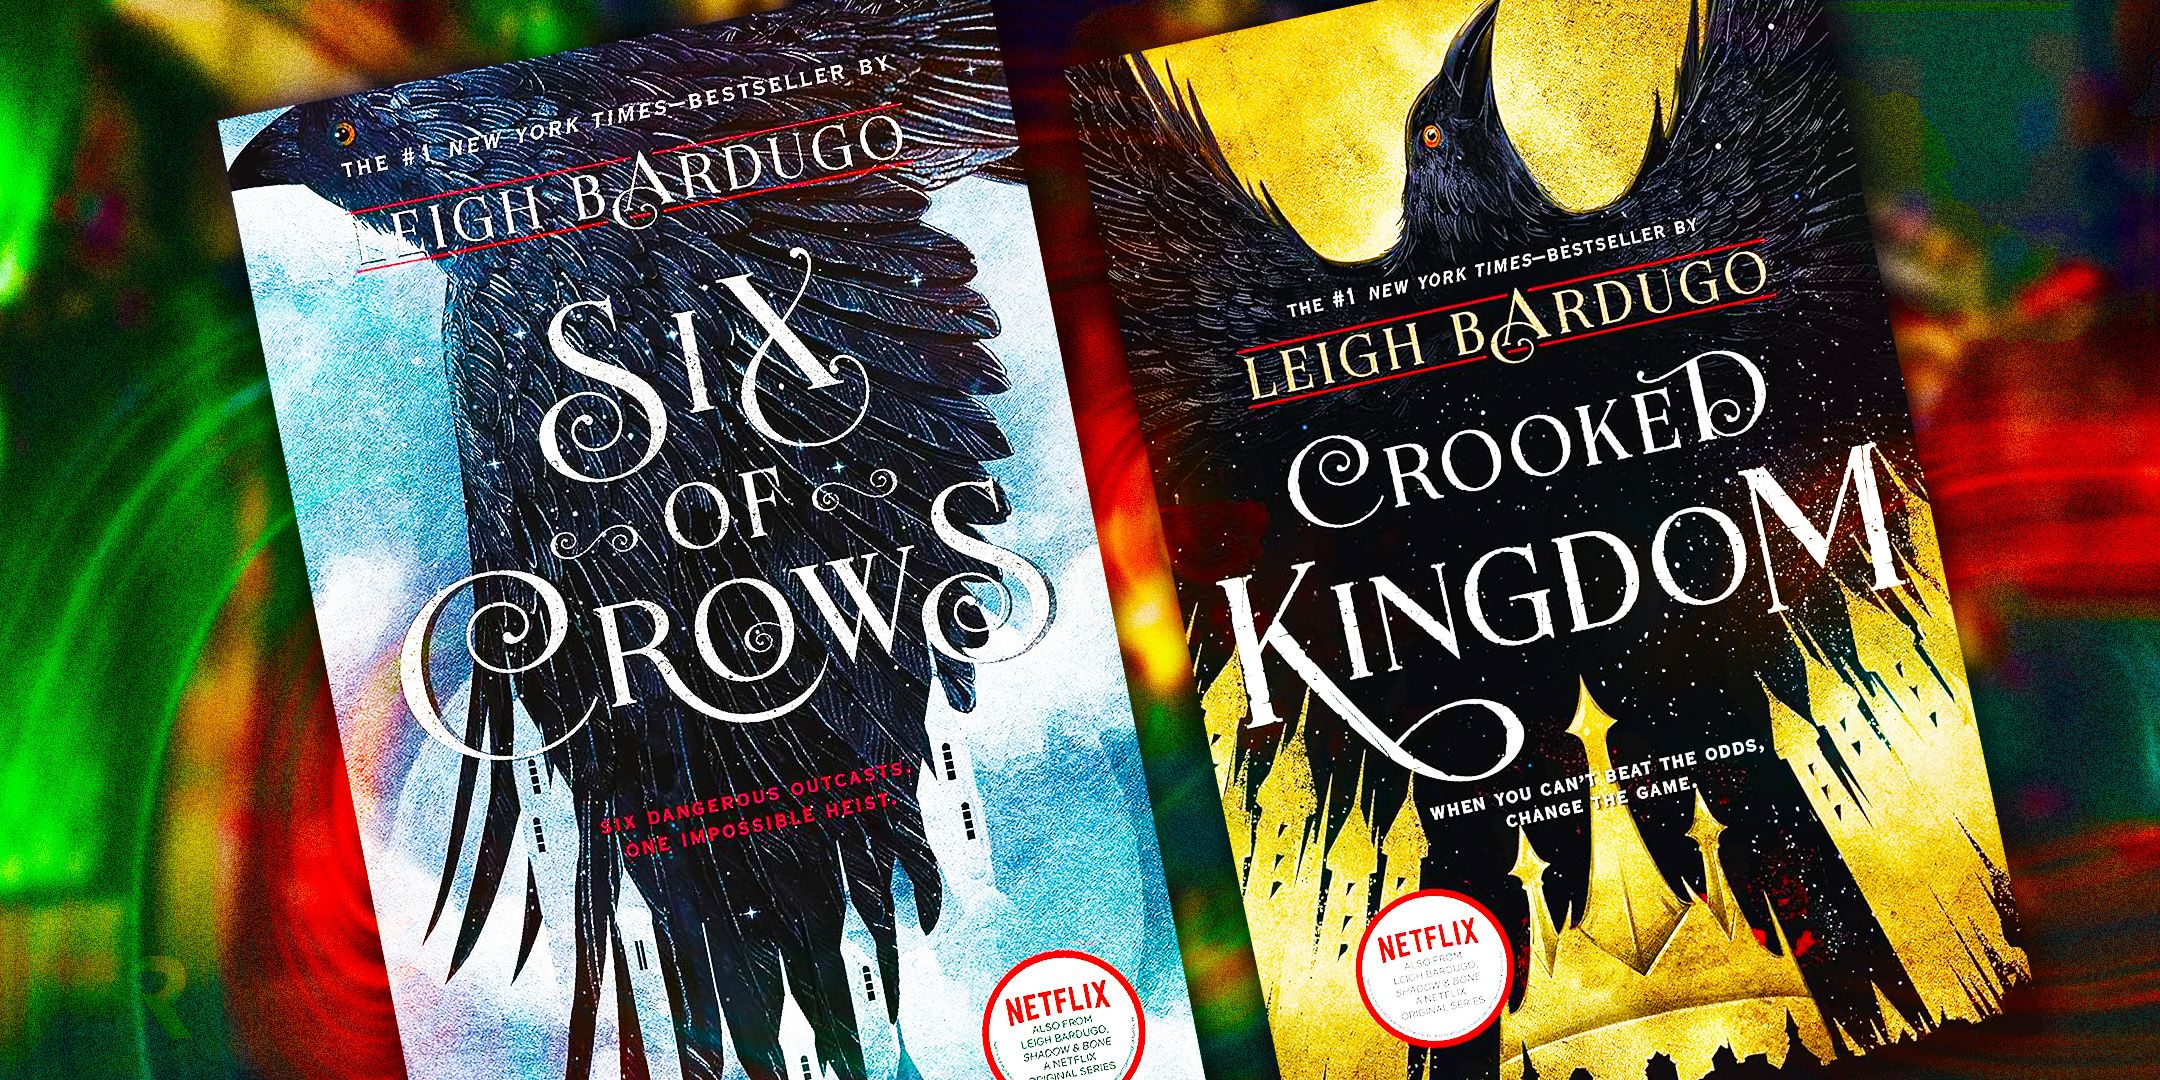 The covers of SIx of Crows and Crooked Kingdom by Leigh Bardugo